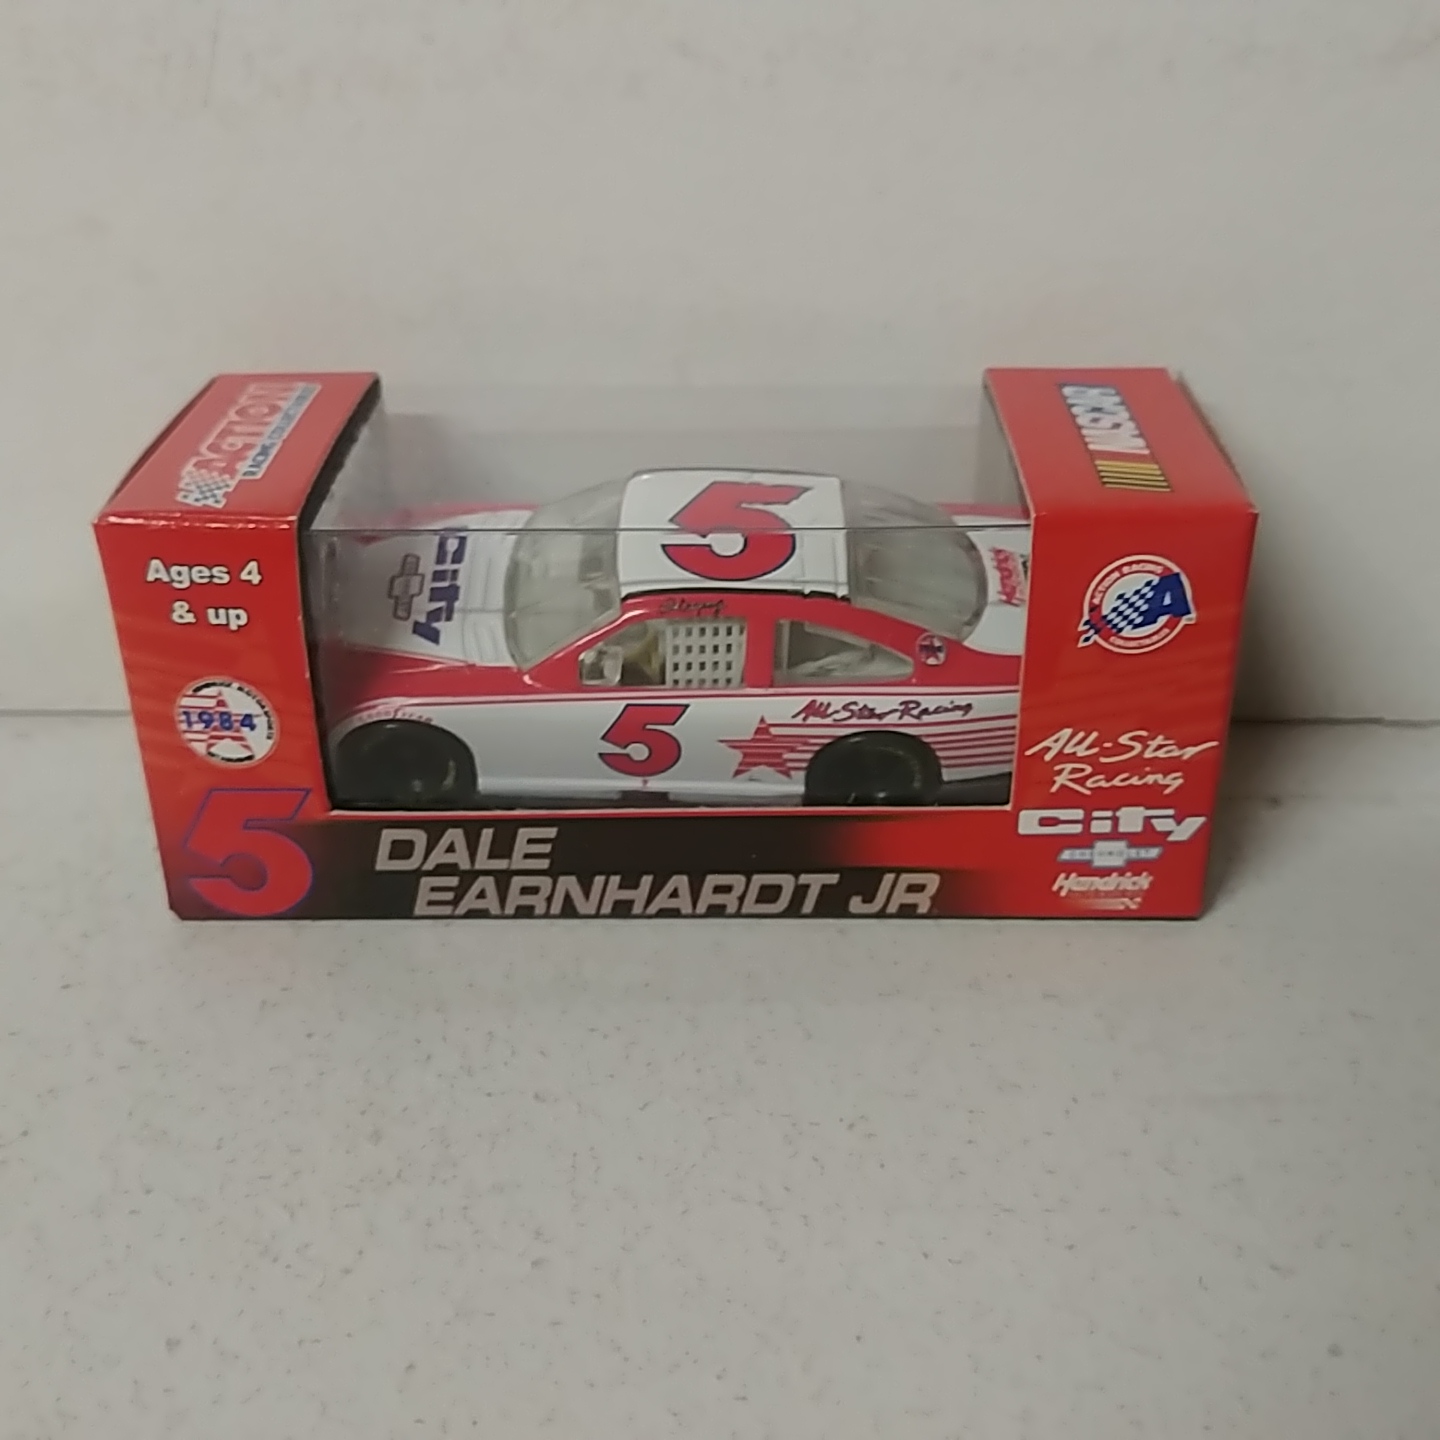 2008 Dale Earnhardt Jr 1/64th City "All Star Racing" Test Car Pitstop Series car